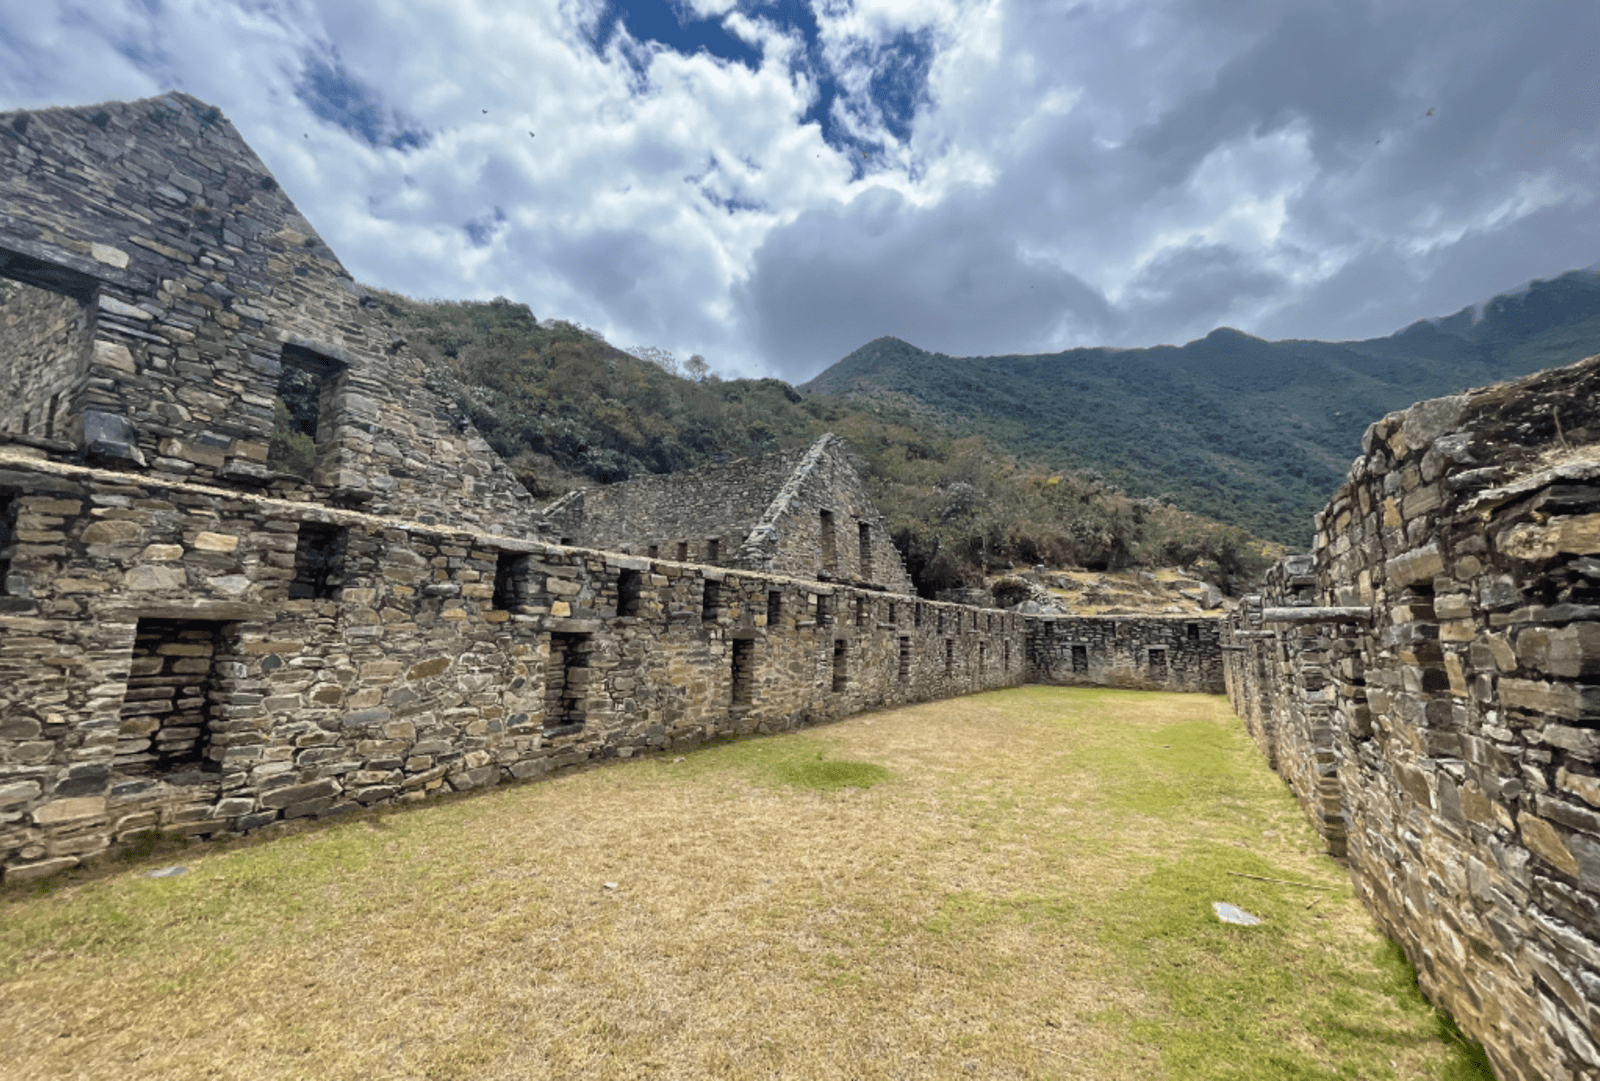 Ruins of the ancient Incan city of Choquequirao, Peru